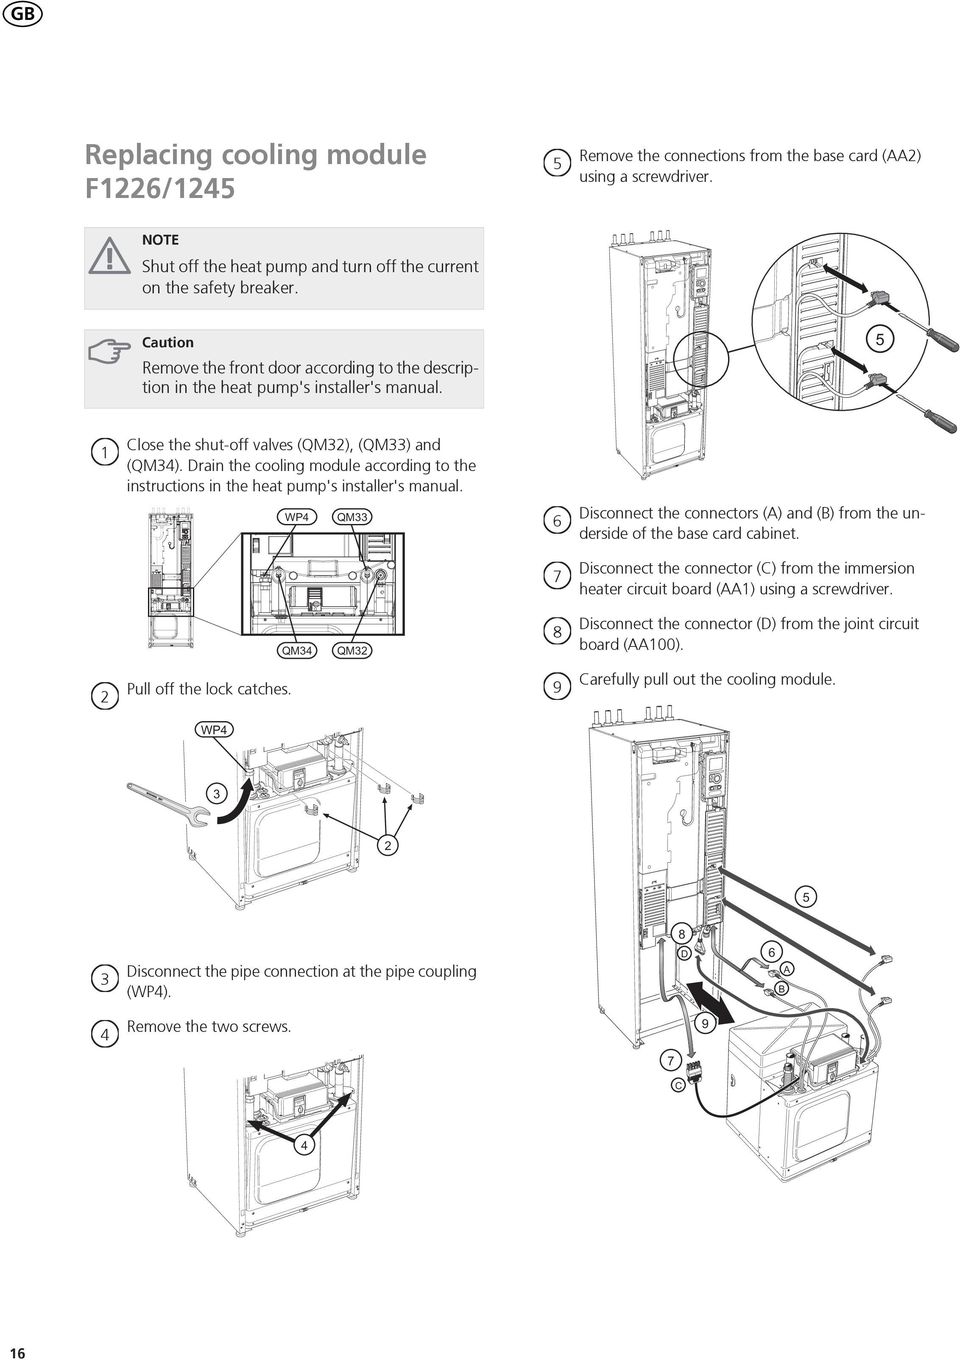 Drain the cooling module according to the instructions in the heat pump's installer's manual. Disconnect the connectors (A) and (B) from the underside of the base card cabinet.